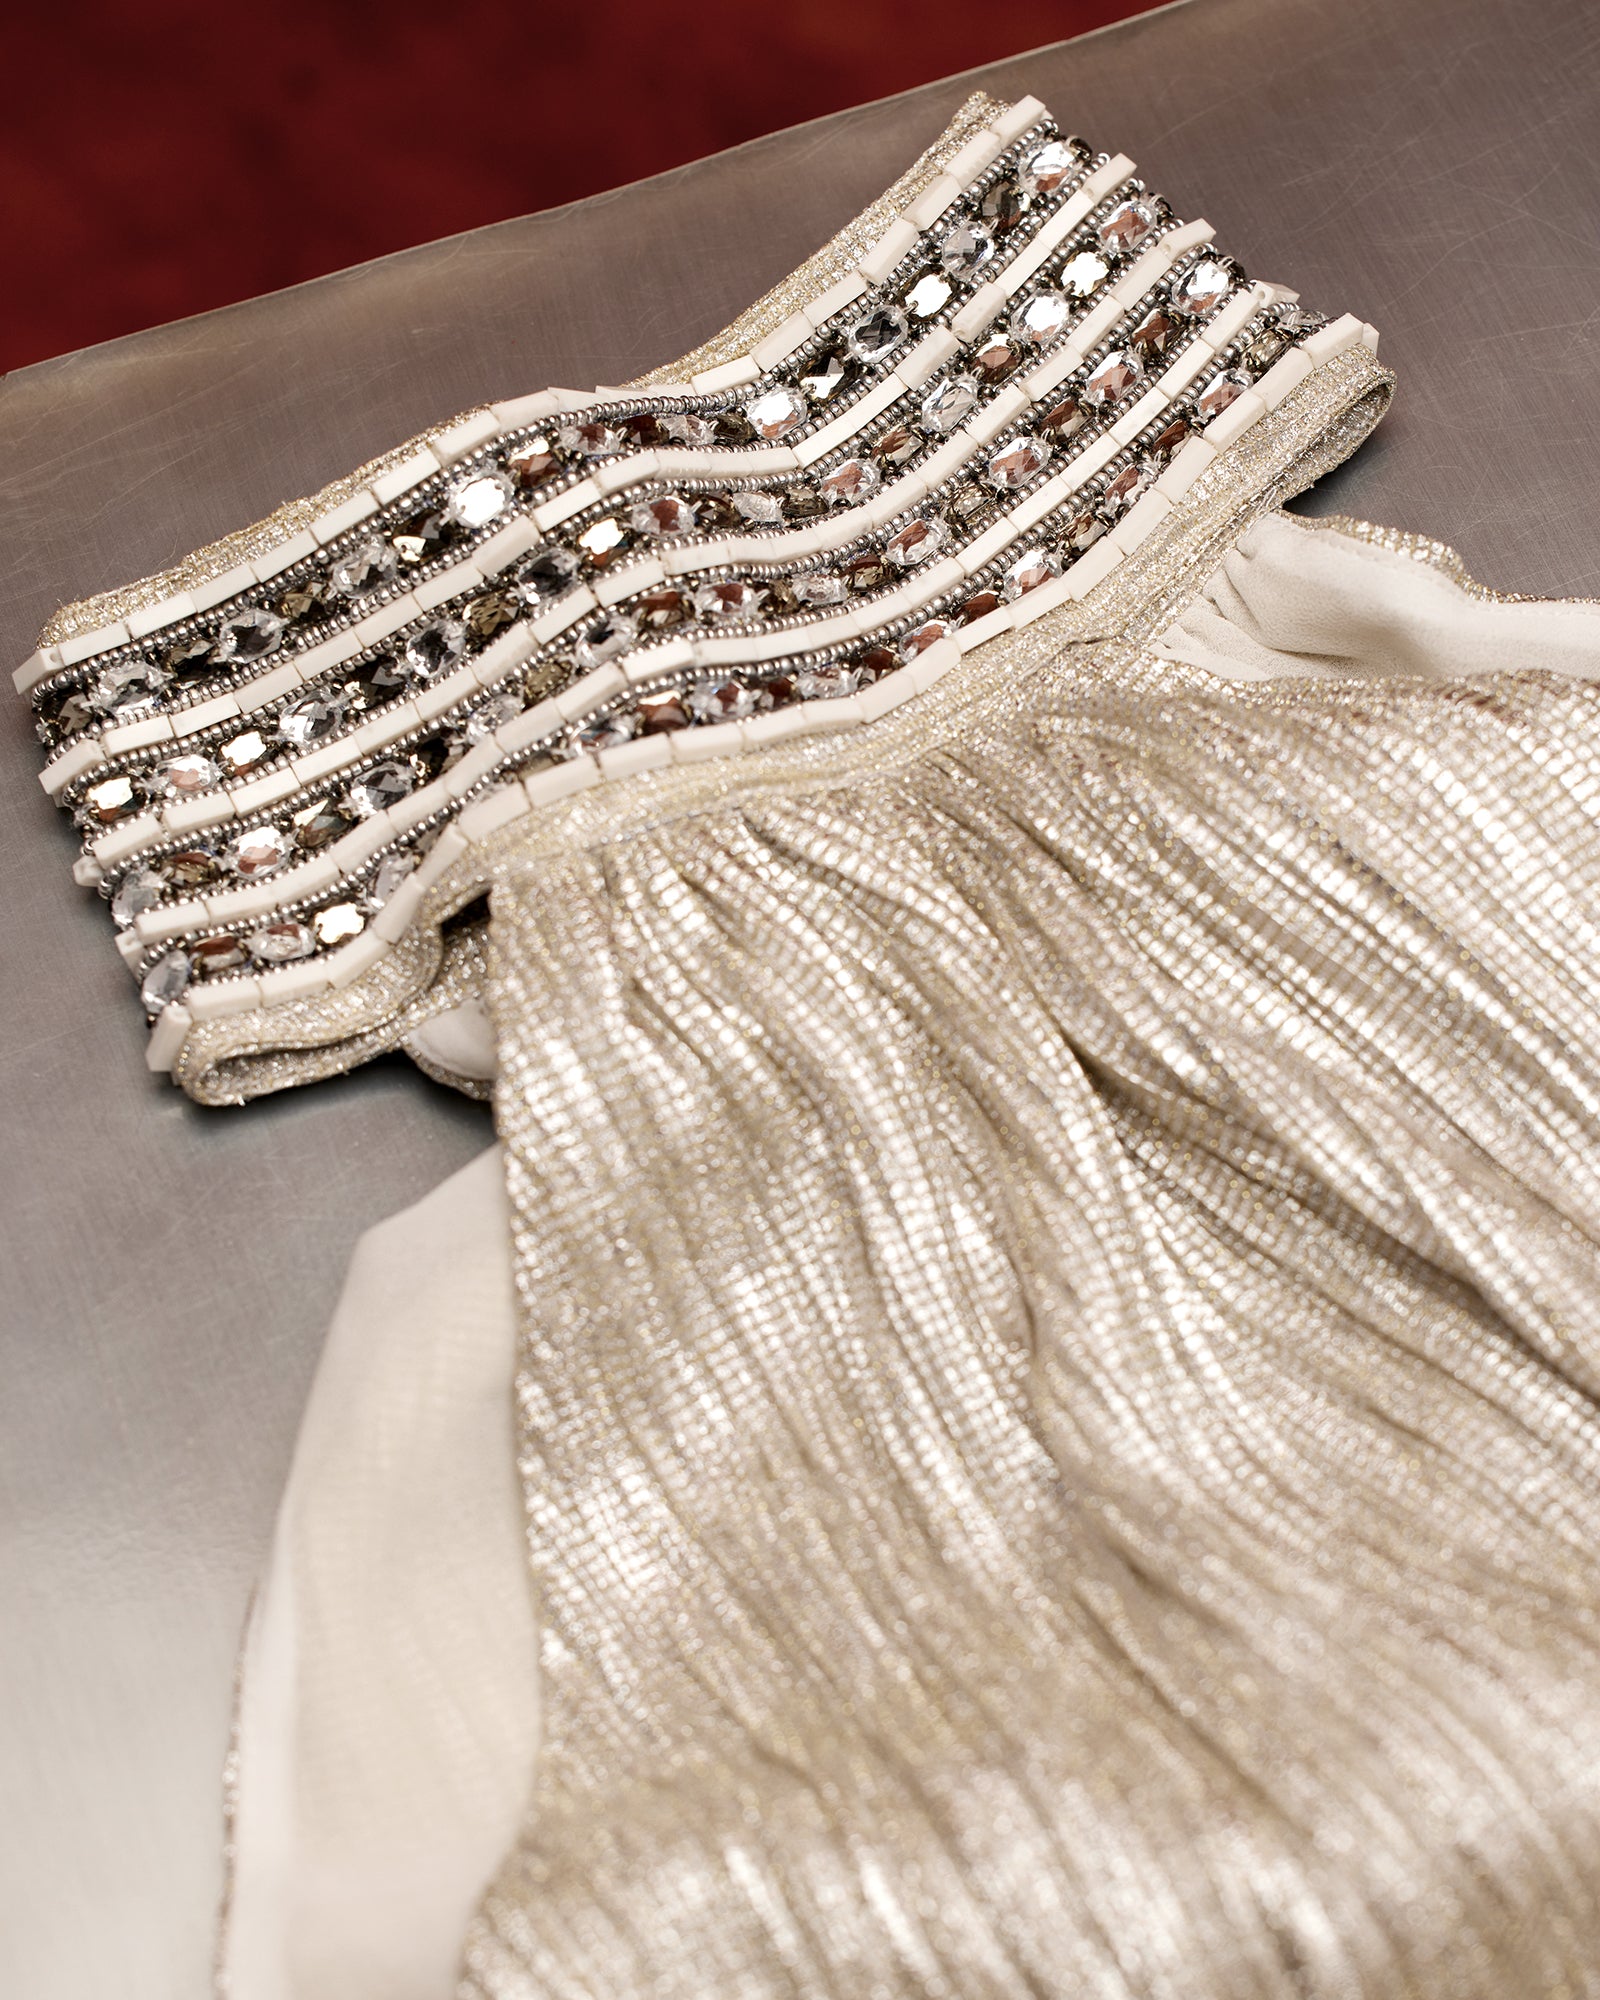 Odile Halter Top in Silver Cascade and Embellishment-Detail of Hand Embellishment with Jewels and Beads